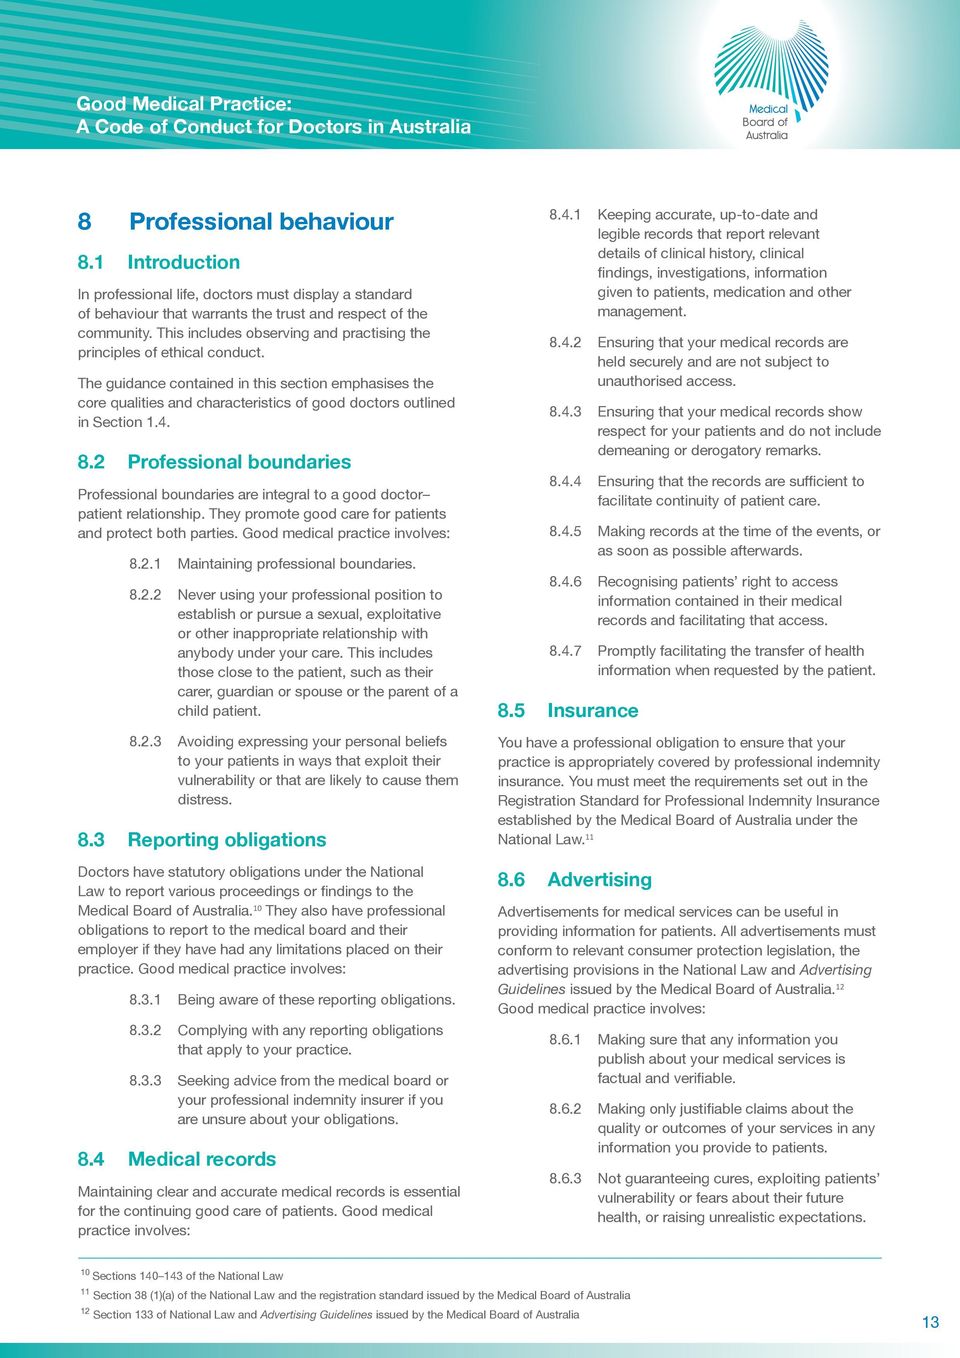 The guidance contained in this section emphasises the core qualities and characteristics of good doctors outlined in Section 1.4. 8.